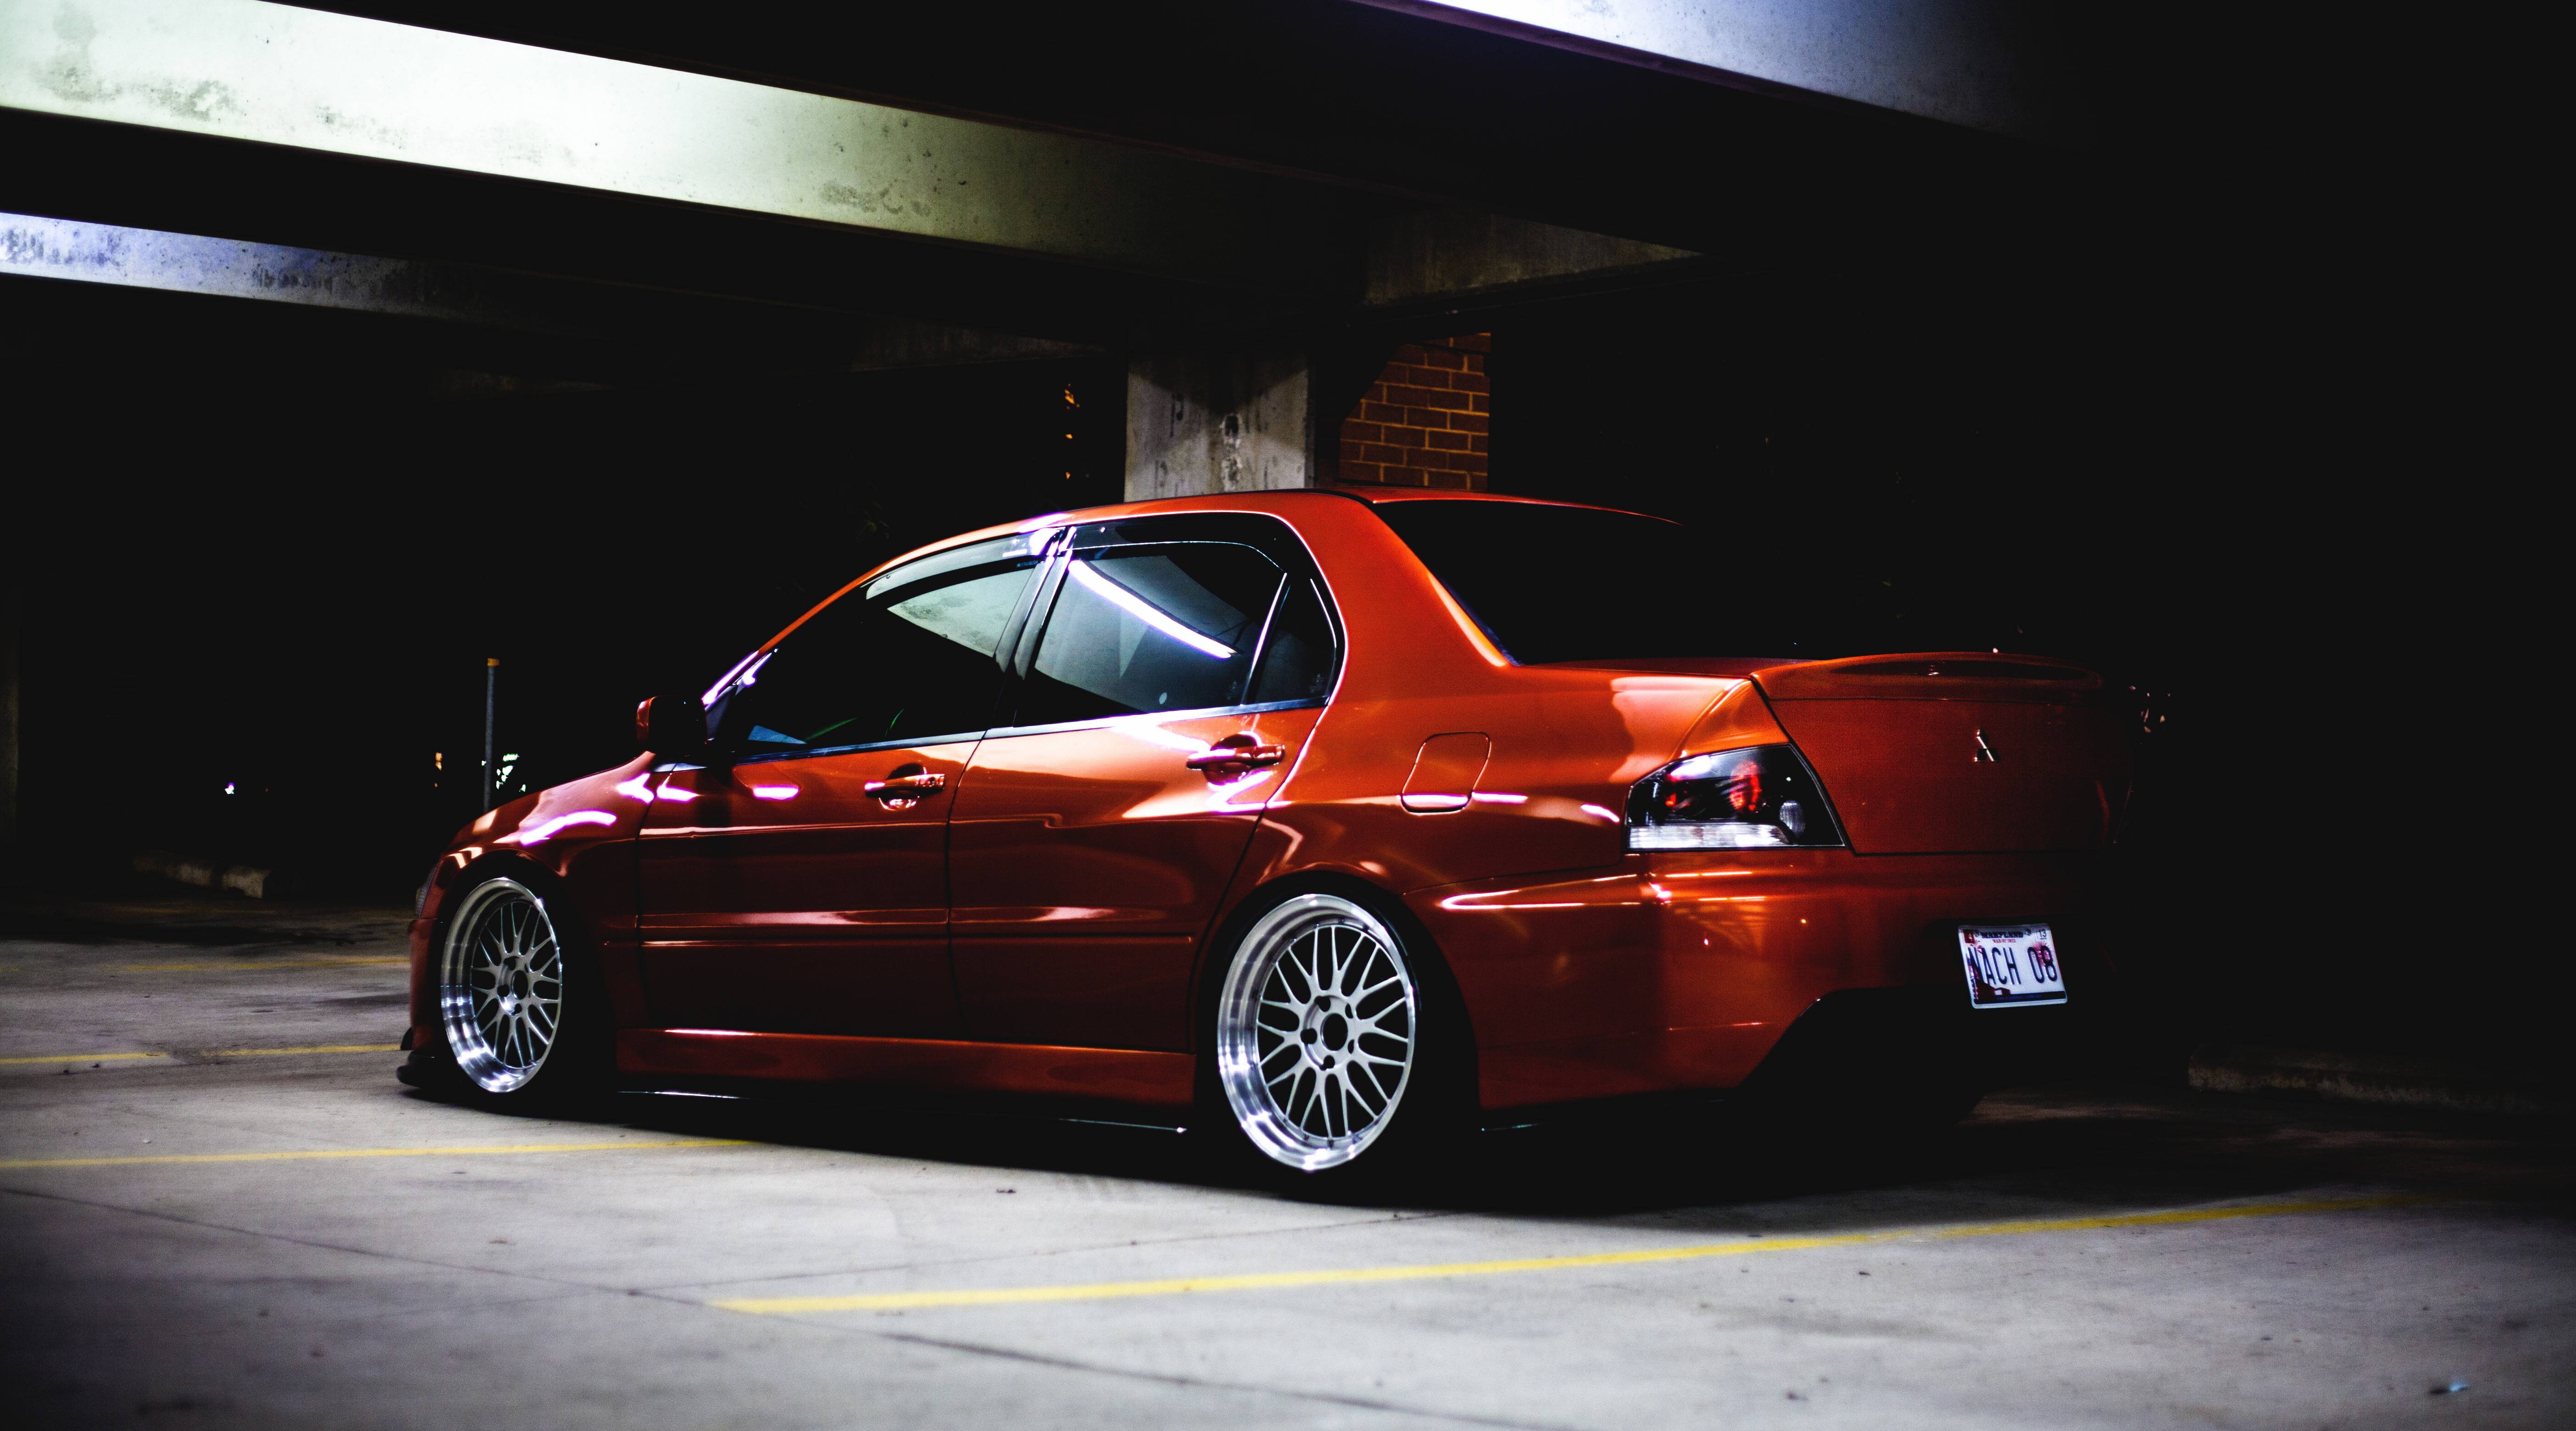  Evo  9  Wallpapers  Top Free Evo  9  Backgrounds  